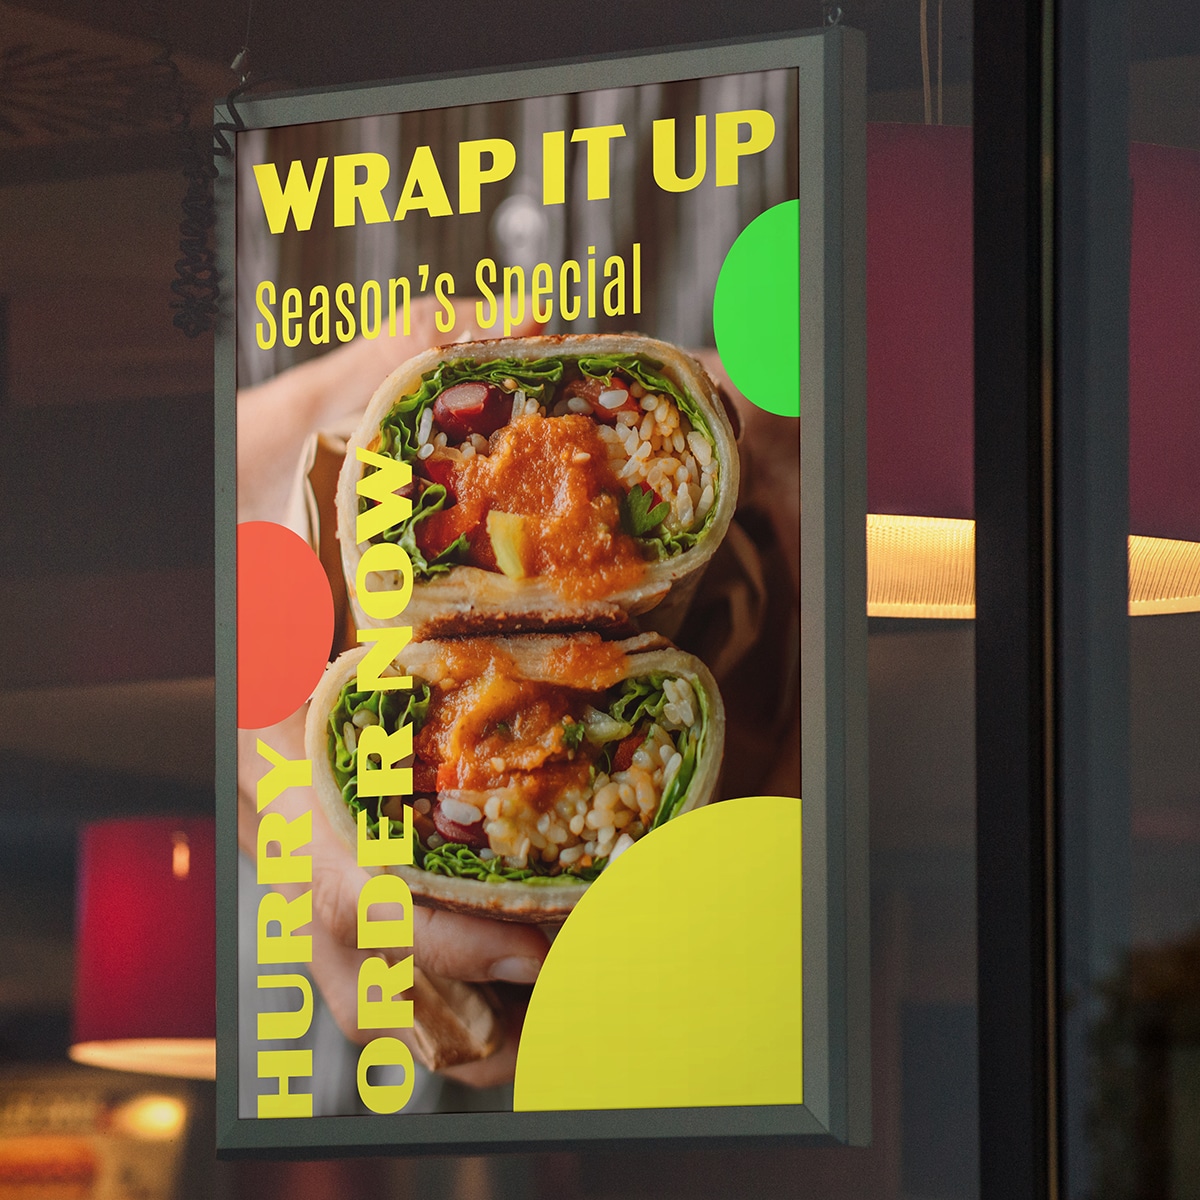 An image of an in-store graphics featuring a wrap